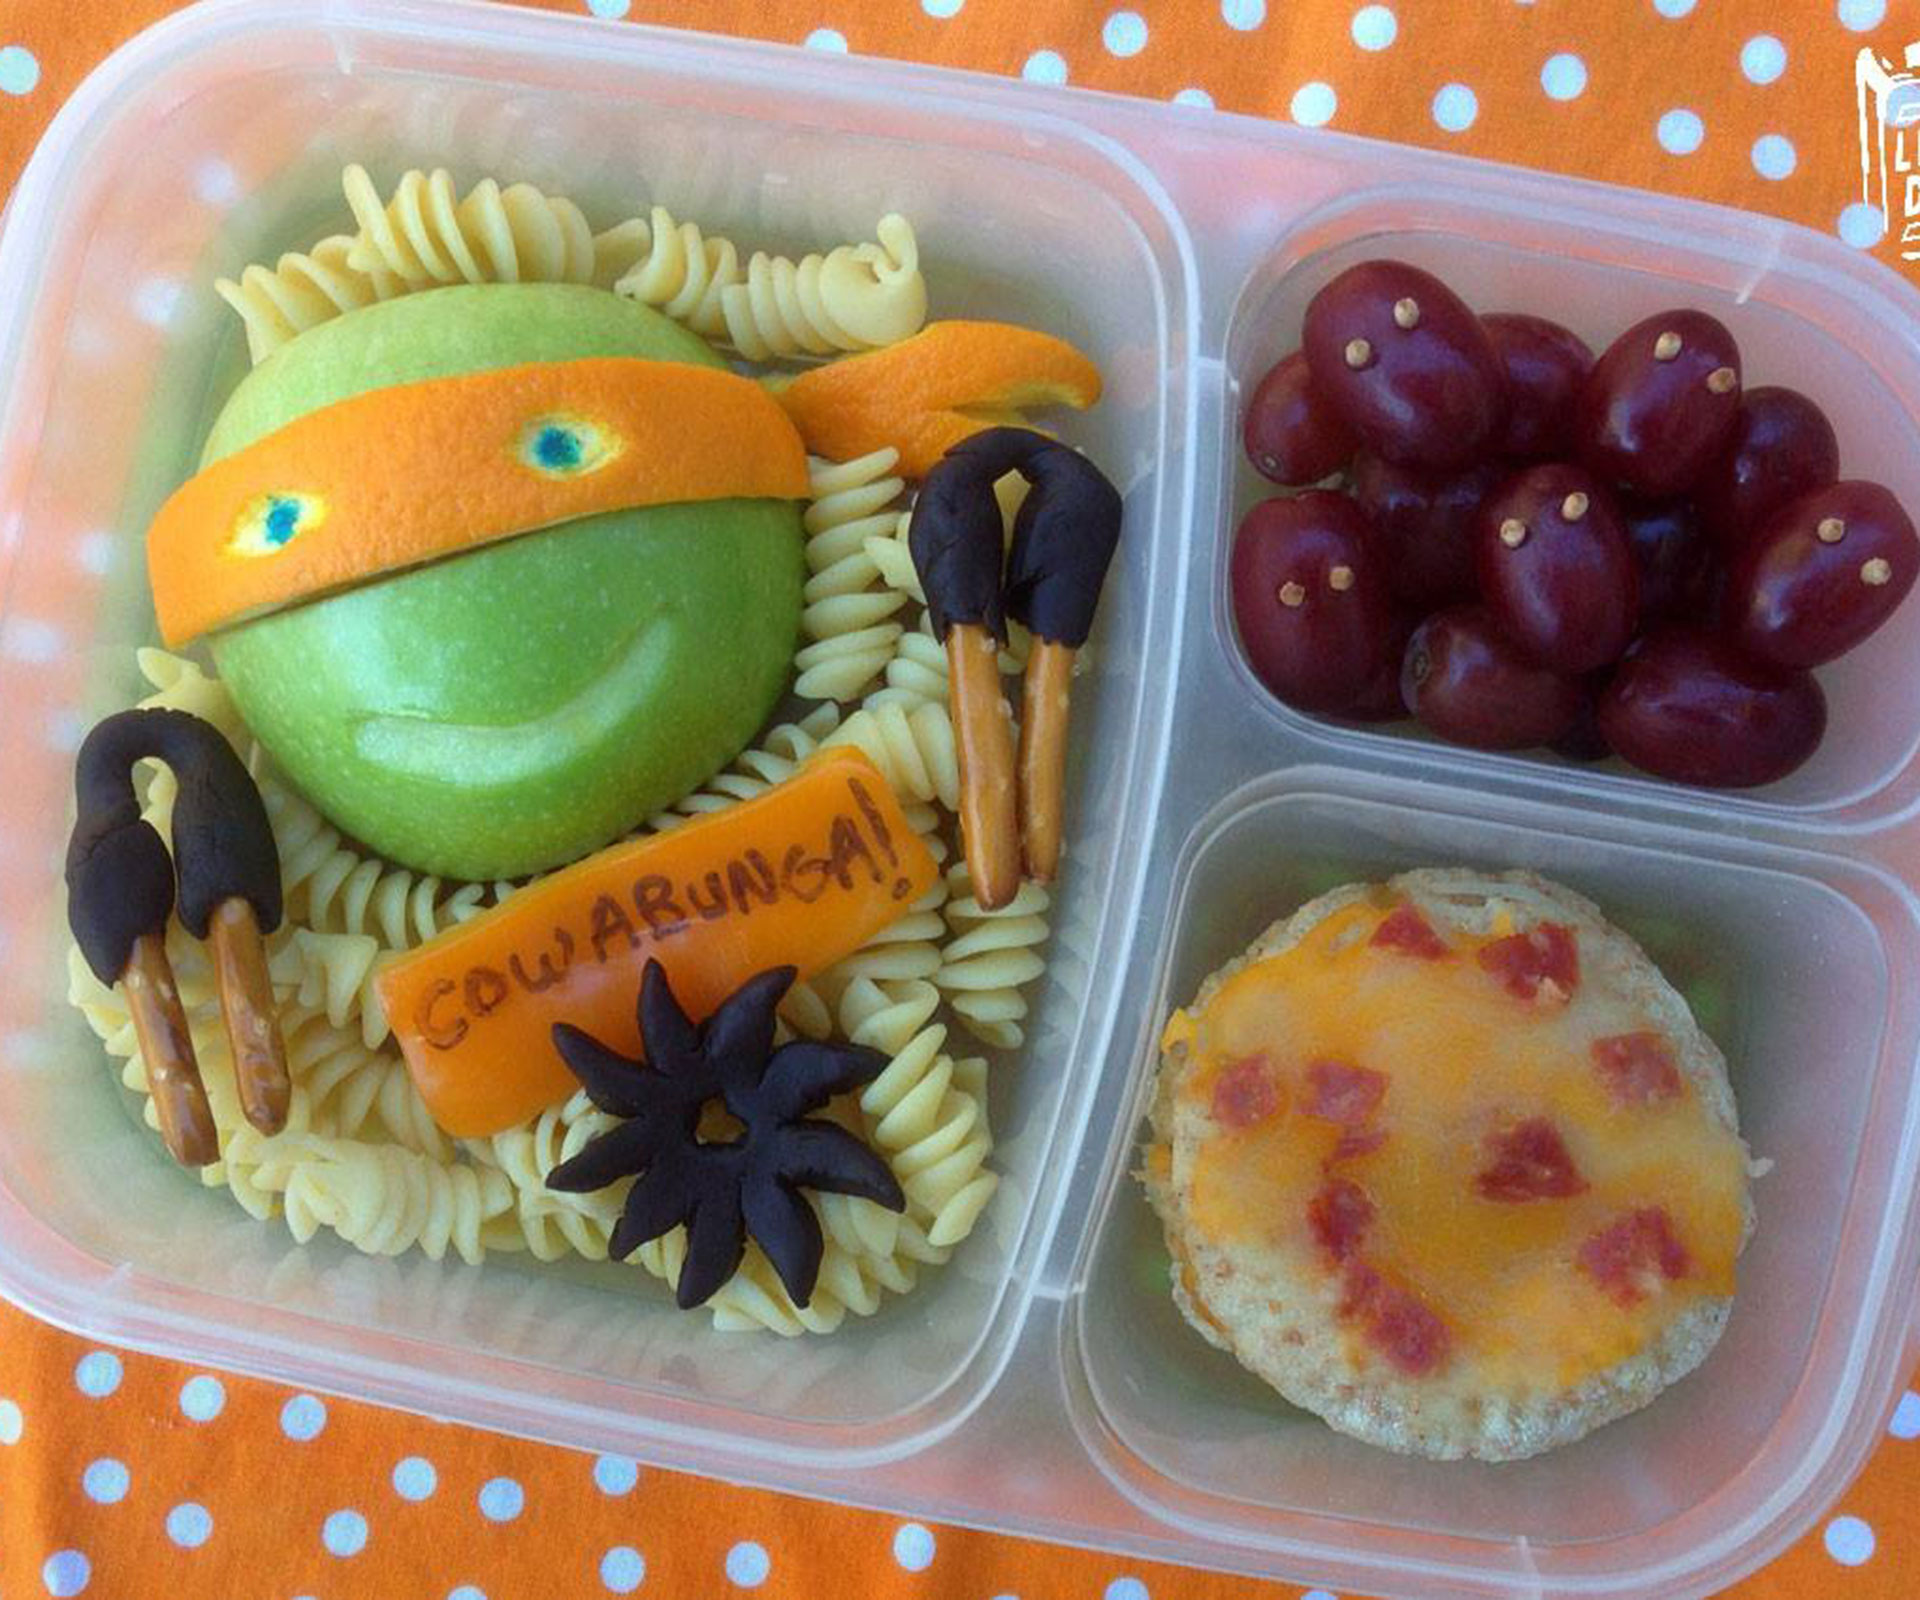 Dad packs incredible lunches for kids